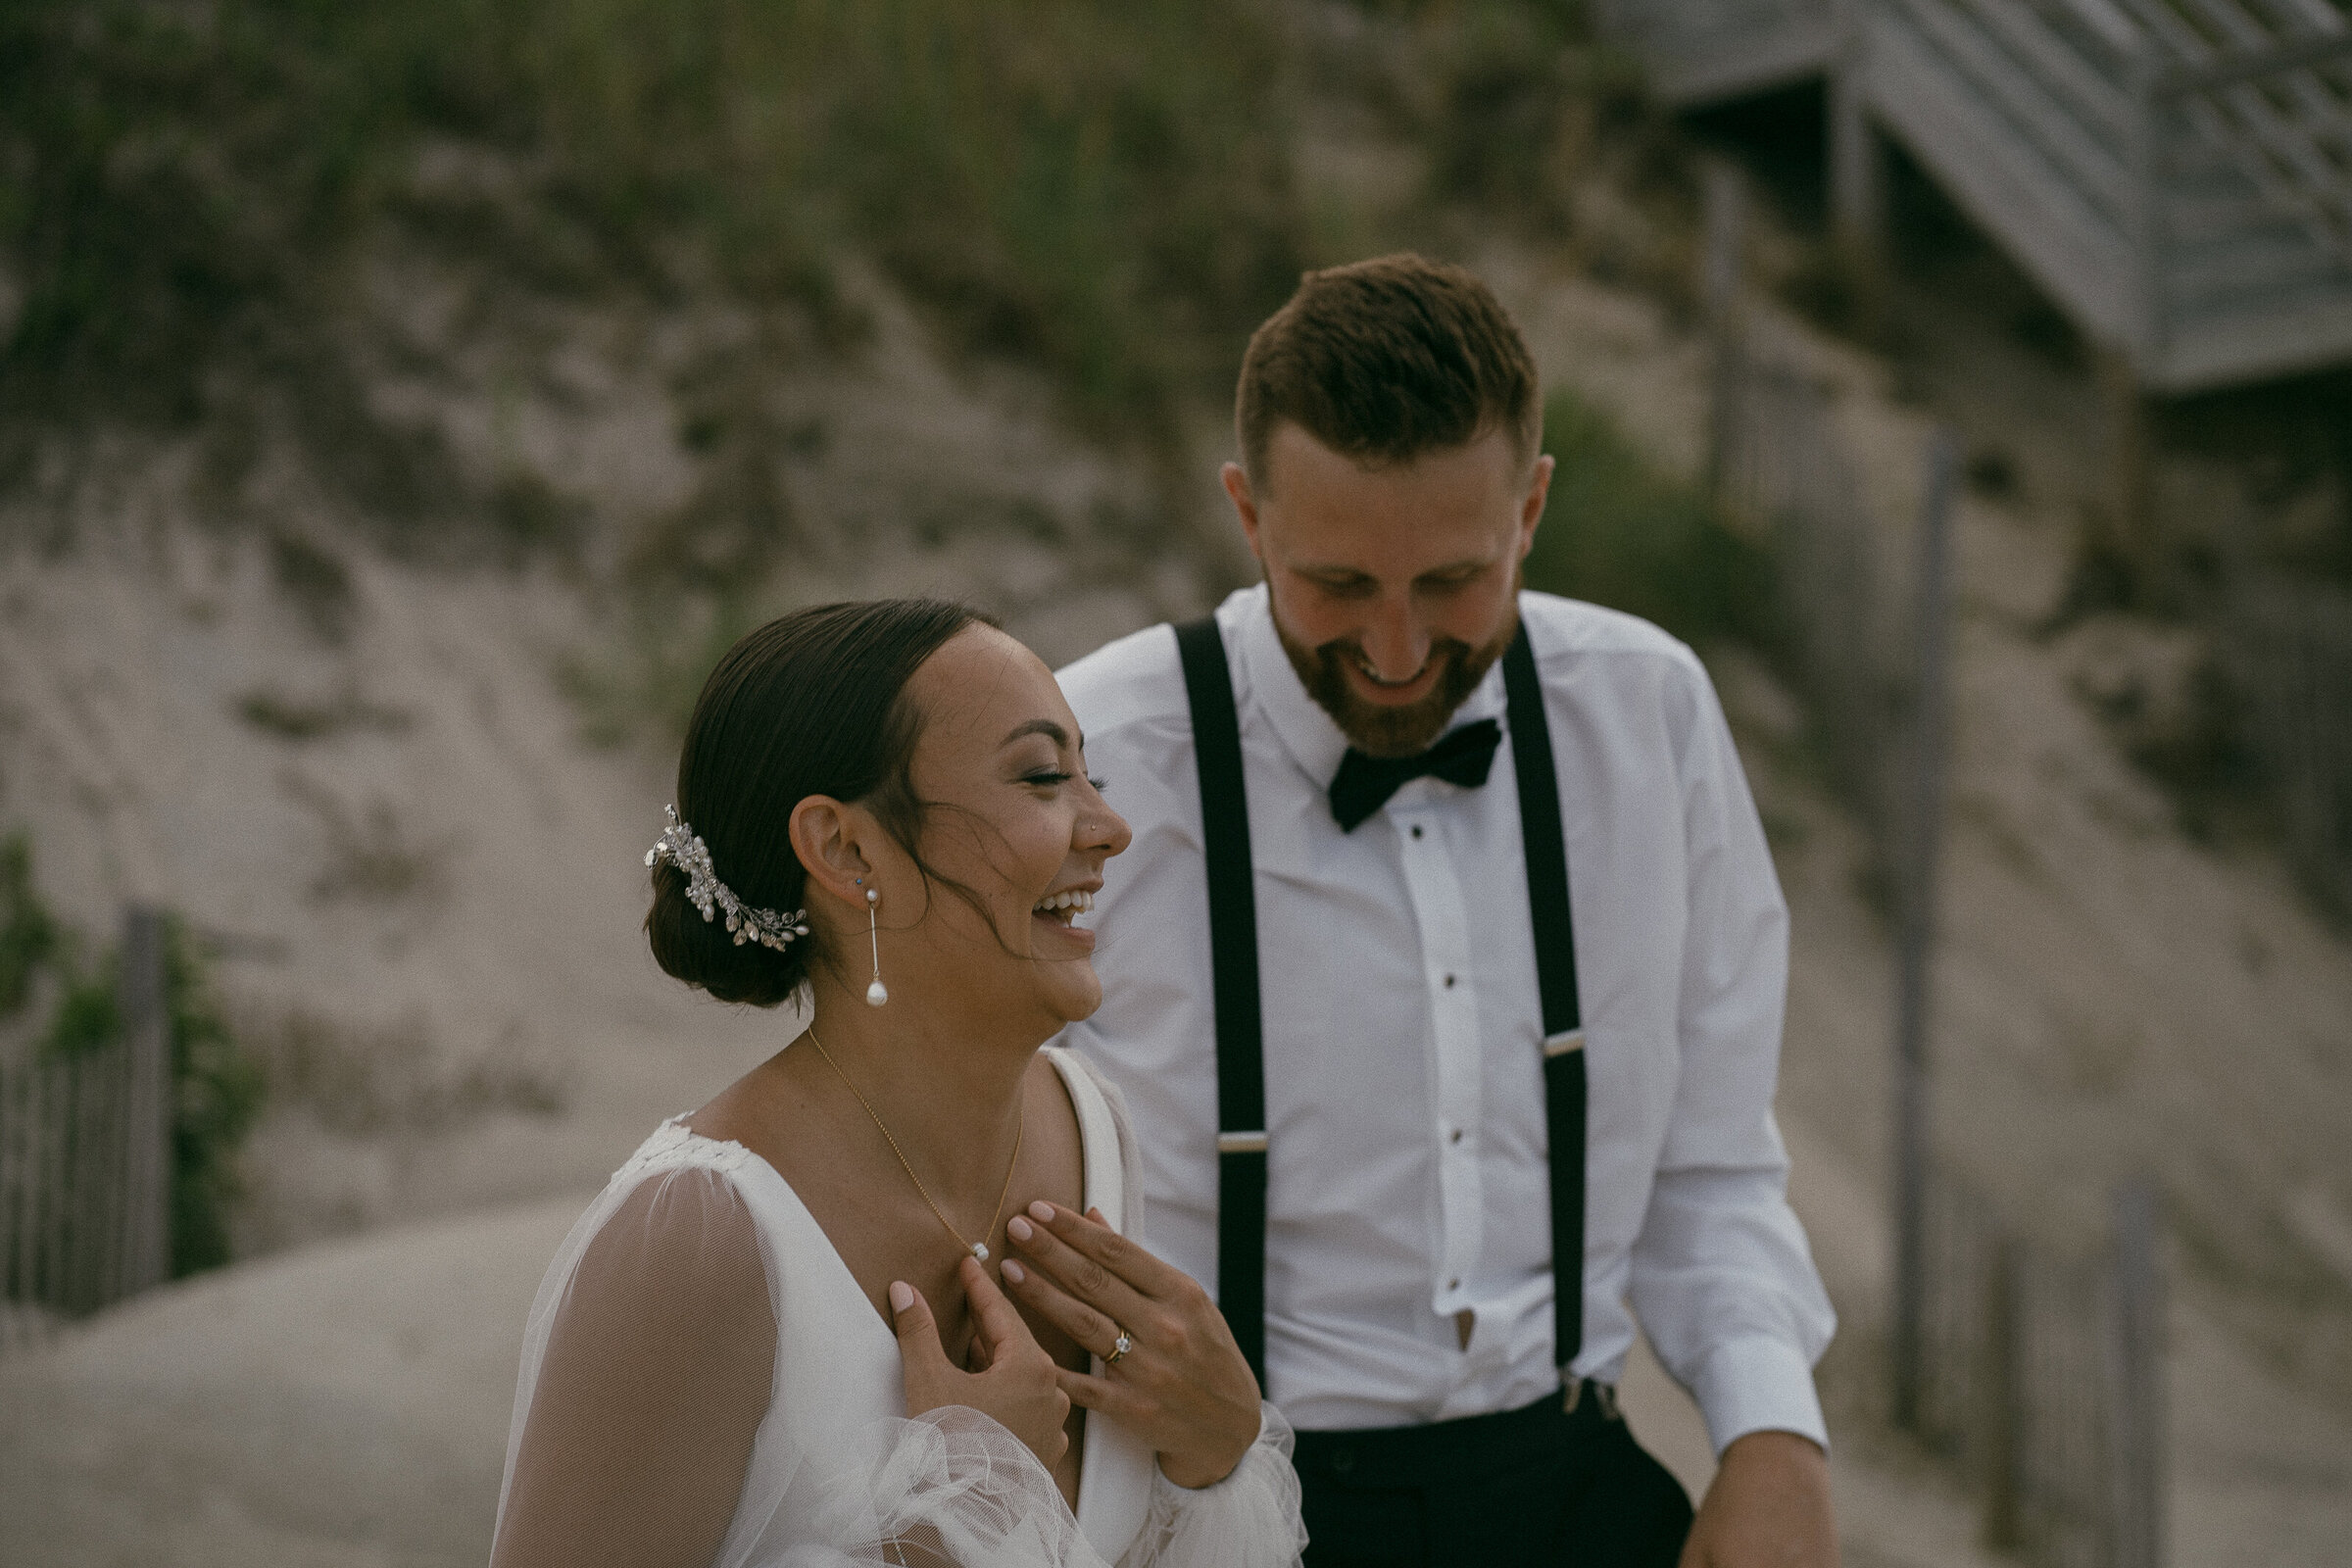 A laughing bride and groom walking on a sandy beach.